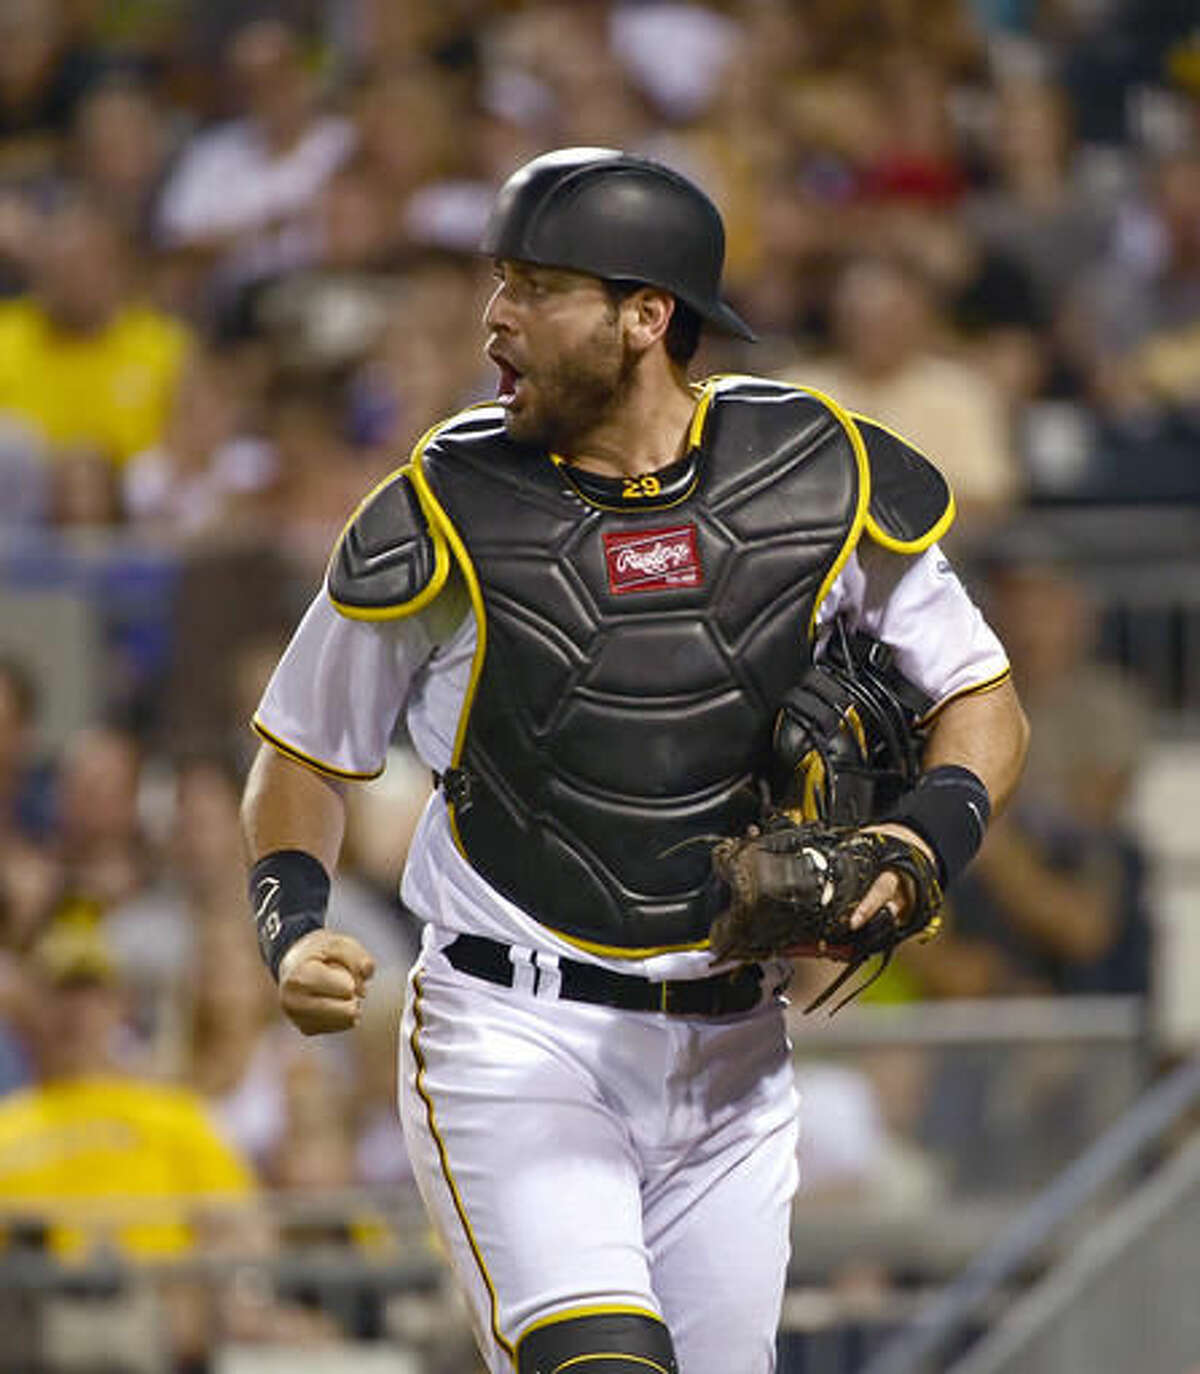 Pittsburgh Pirates catcher Francisco Cervelli clenches his fist after a strikeout in the eighth inning of a baseball game against the Cincinnati Reds in Pittsburgh, Friday, Aug. 5, 2016. (AP Photo/Fred Vuich)